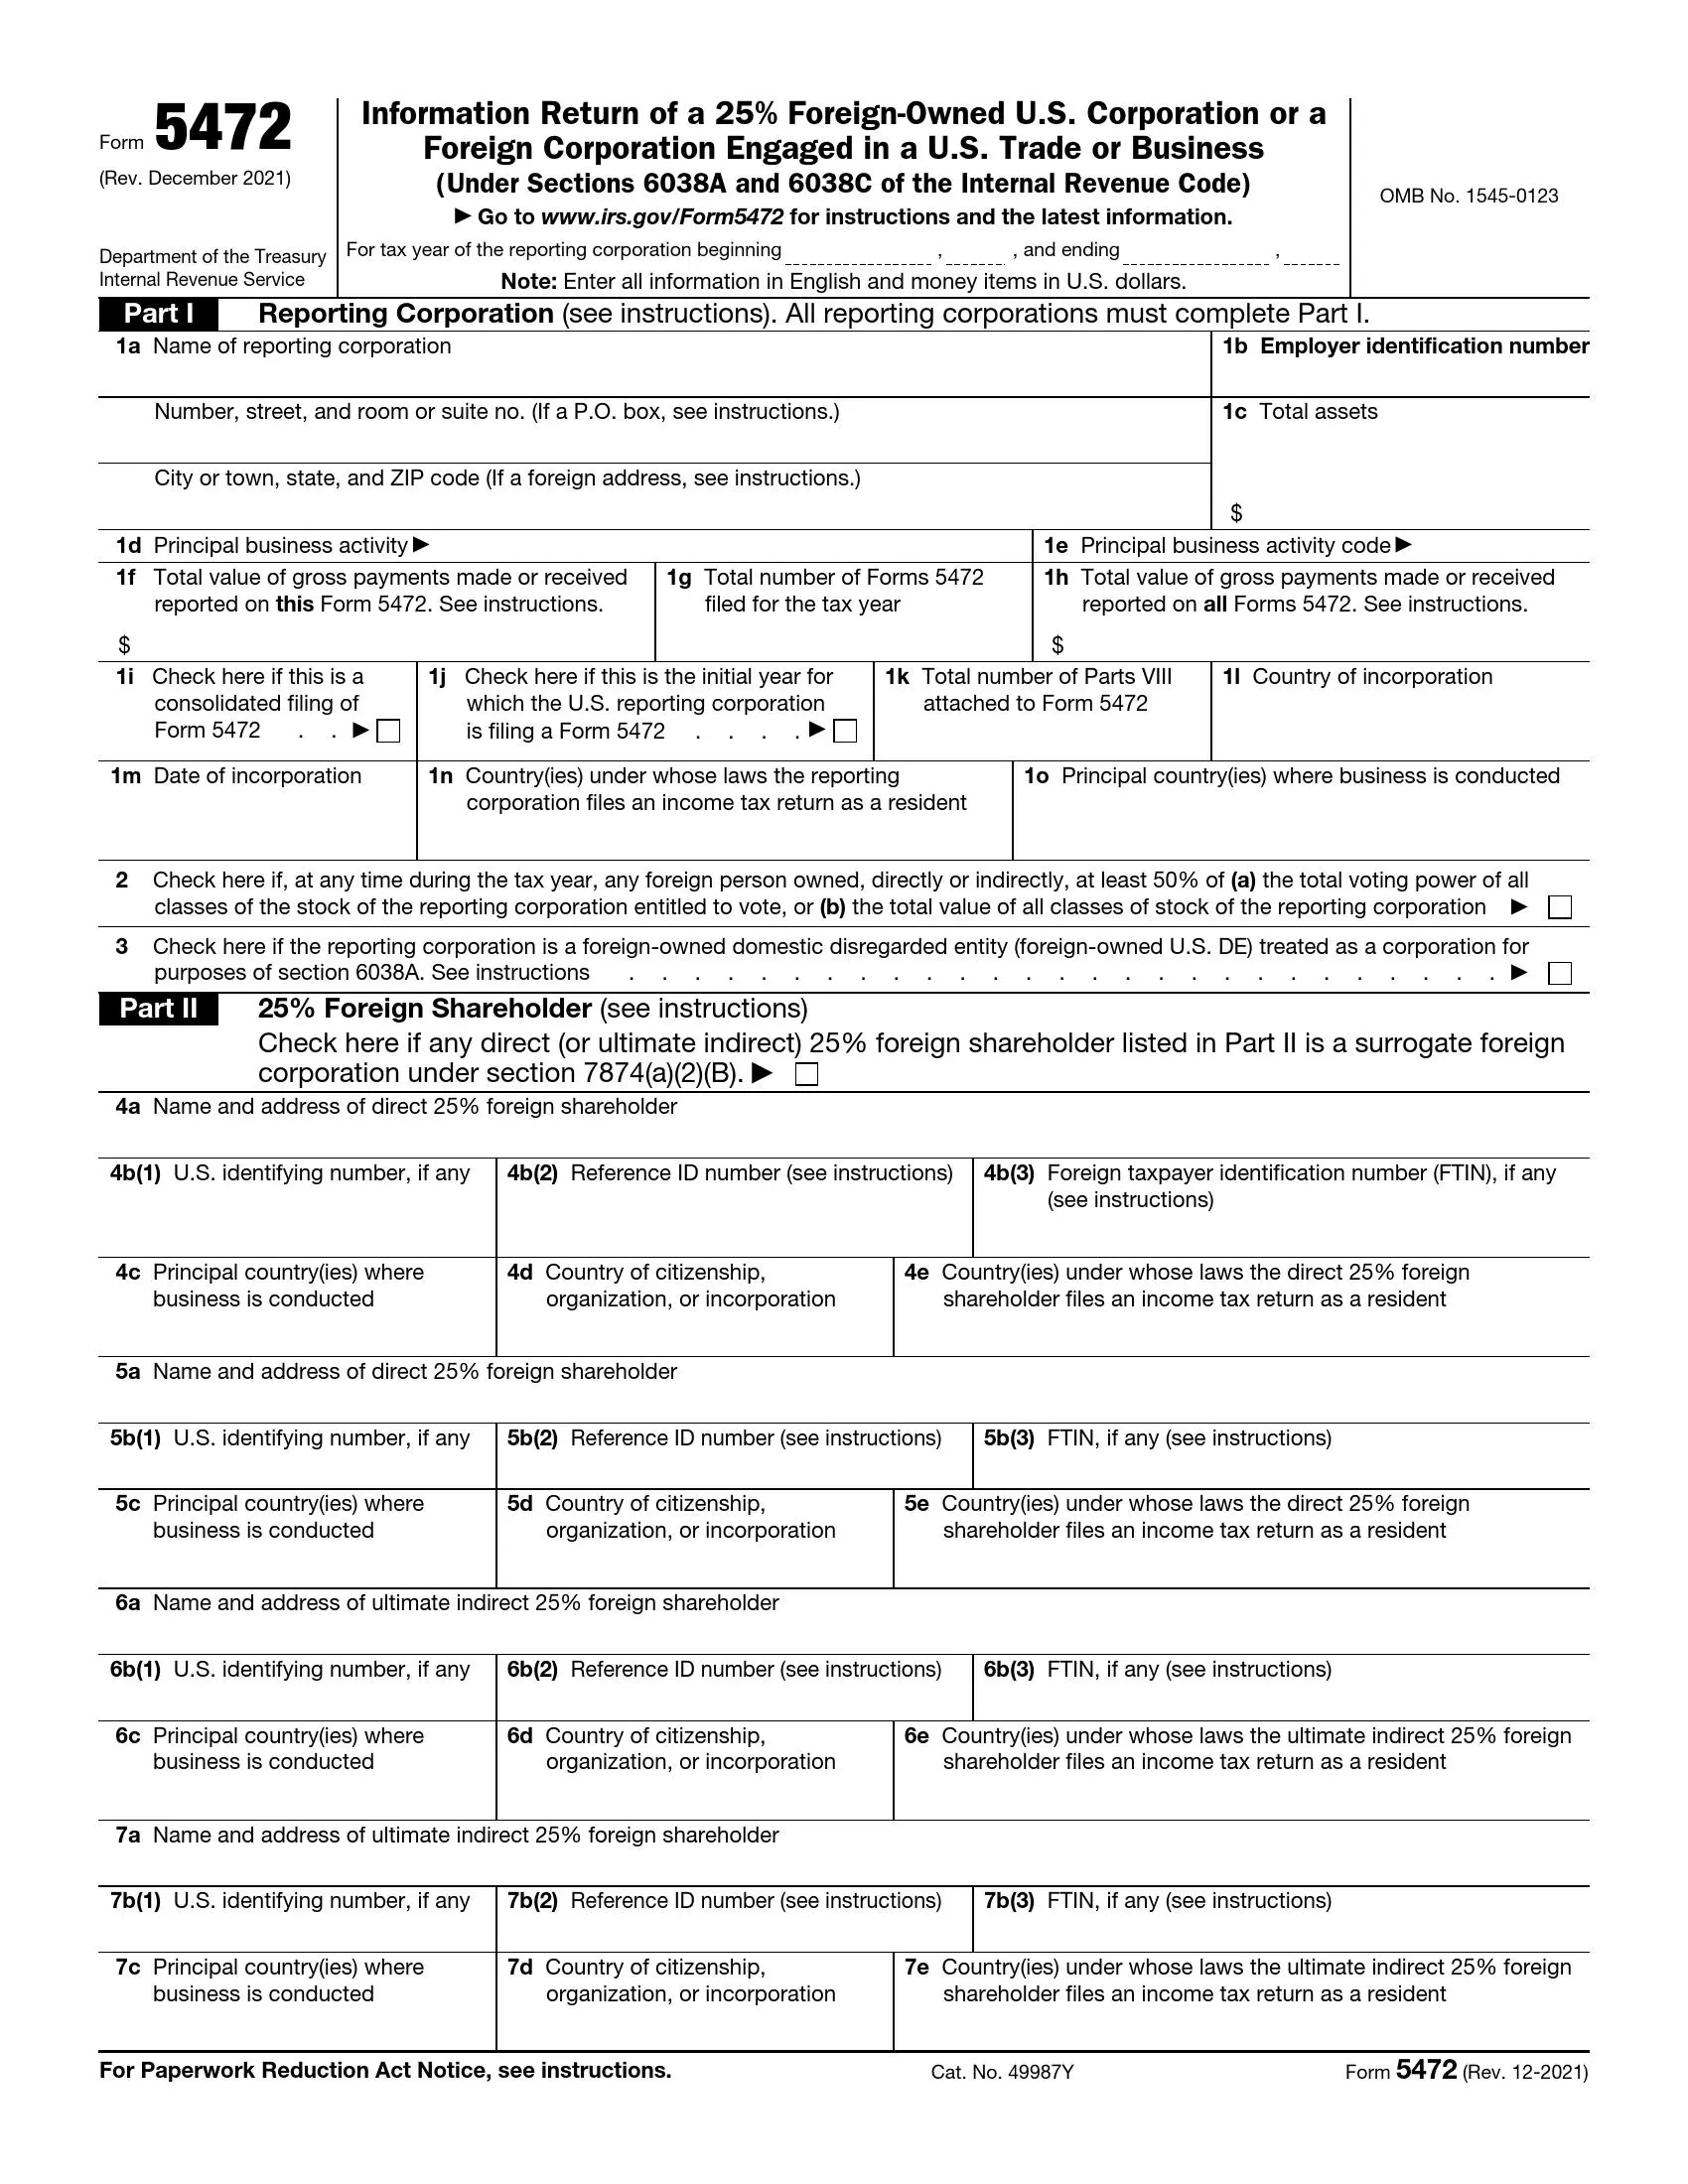 irs form 5472 rev 12 2021 preview